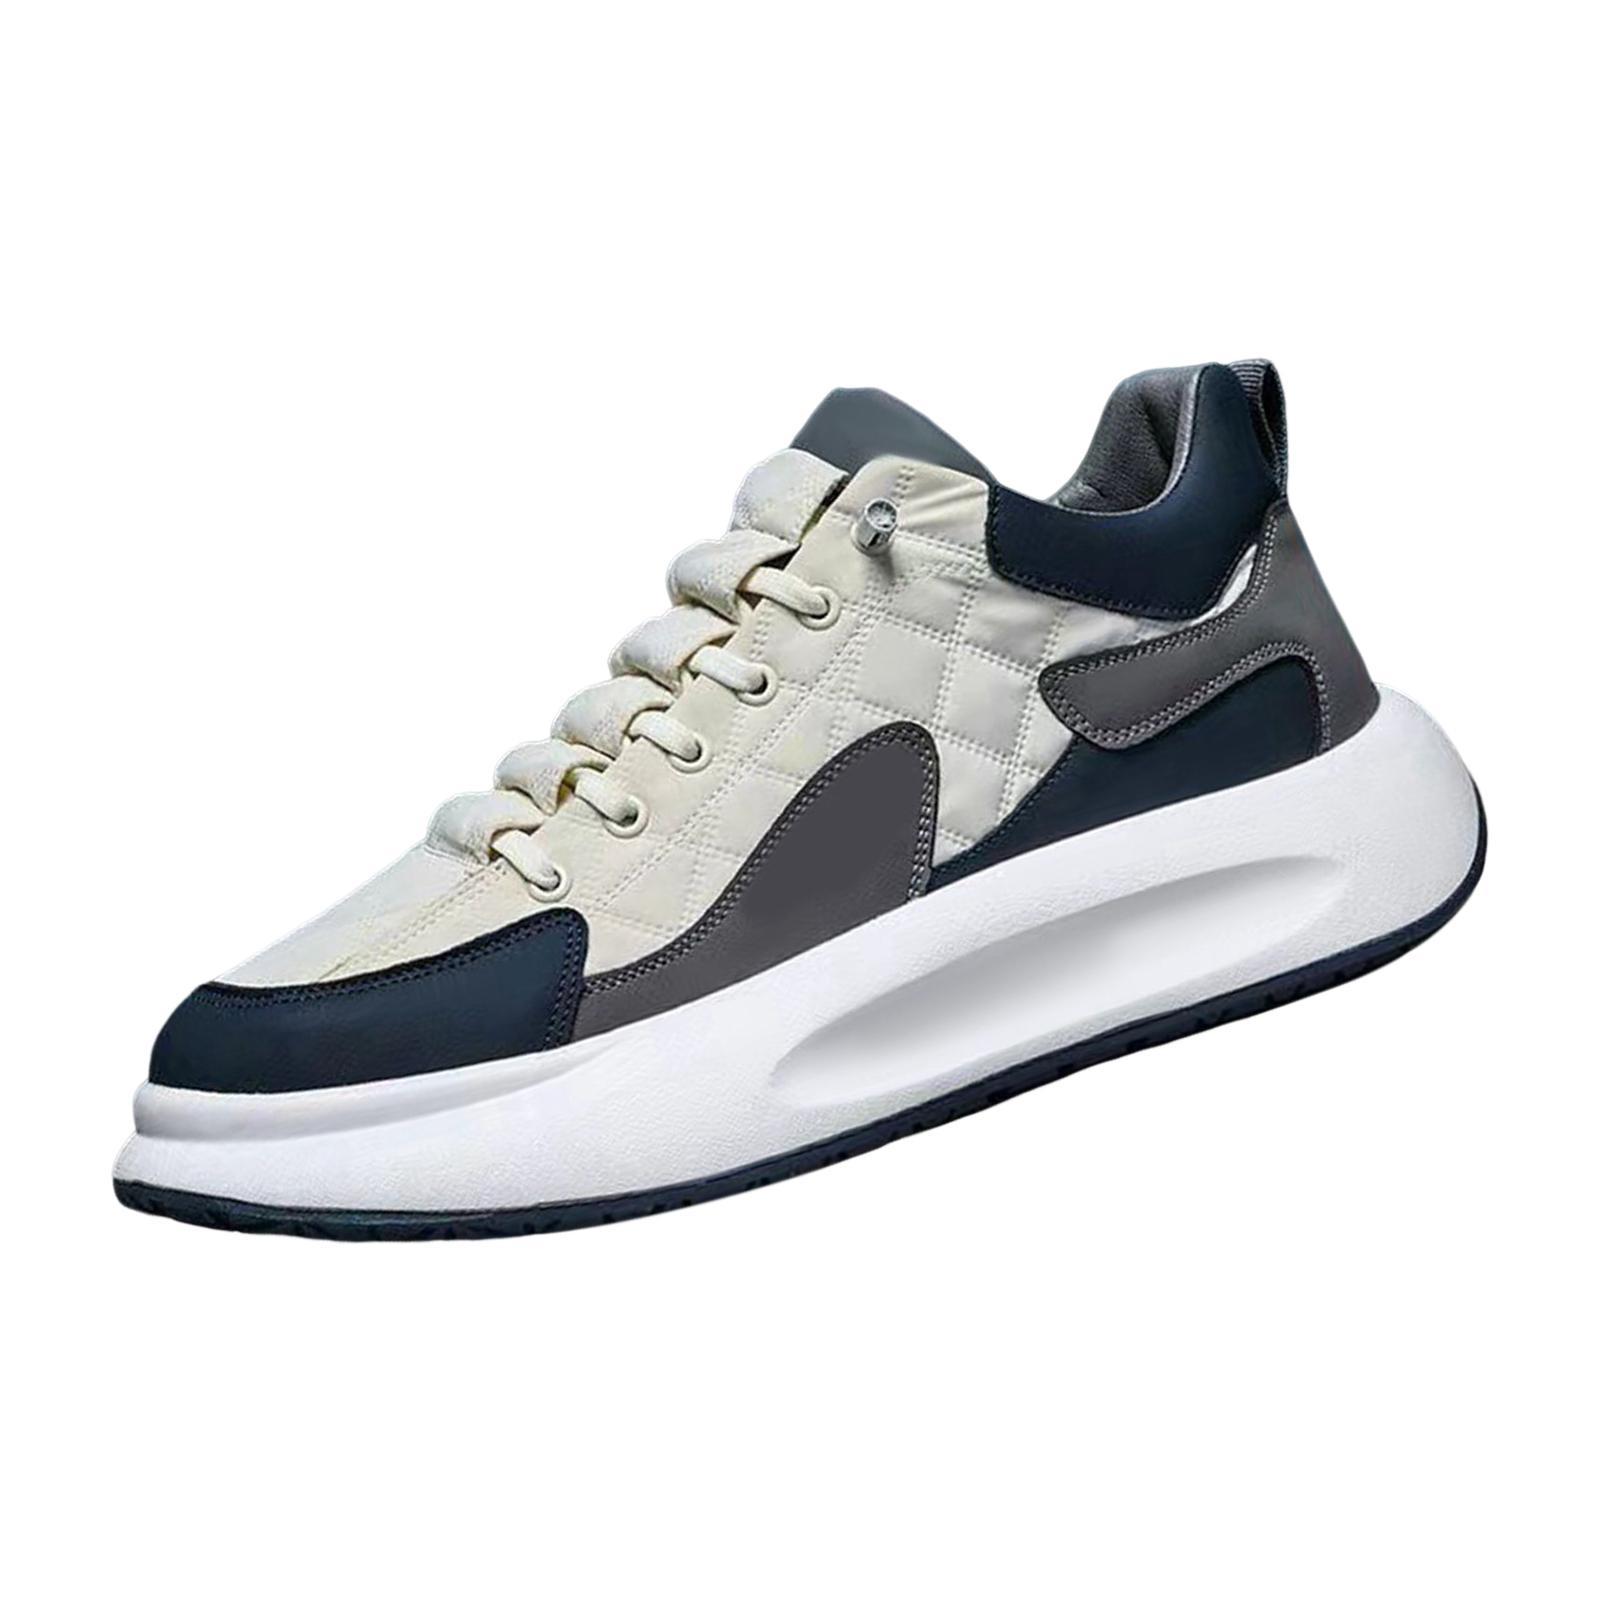 Youth Men Casual Shoes, High Performance Comfortable Breathable Shoes  Trendy Leisure Sneakers for Work Fishing Jogging Sports Road Running - Giá  Tiki khuyến mãi: 230,000đ - Mua ngay! - Tư vấn mua